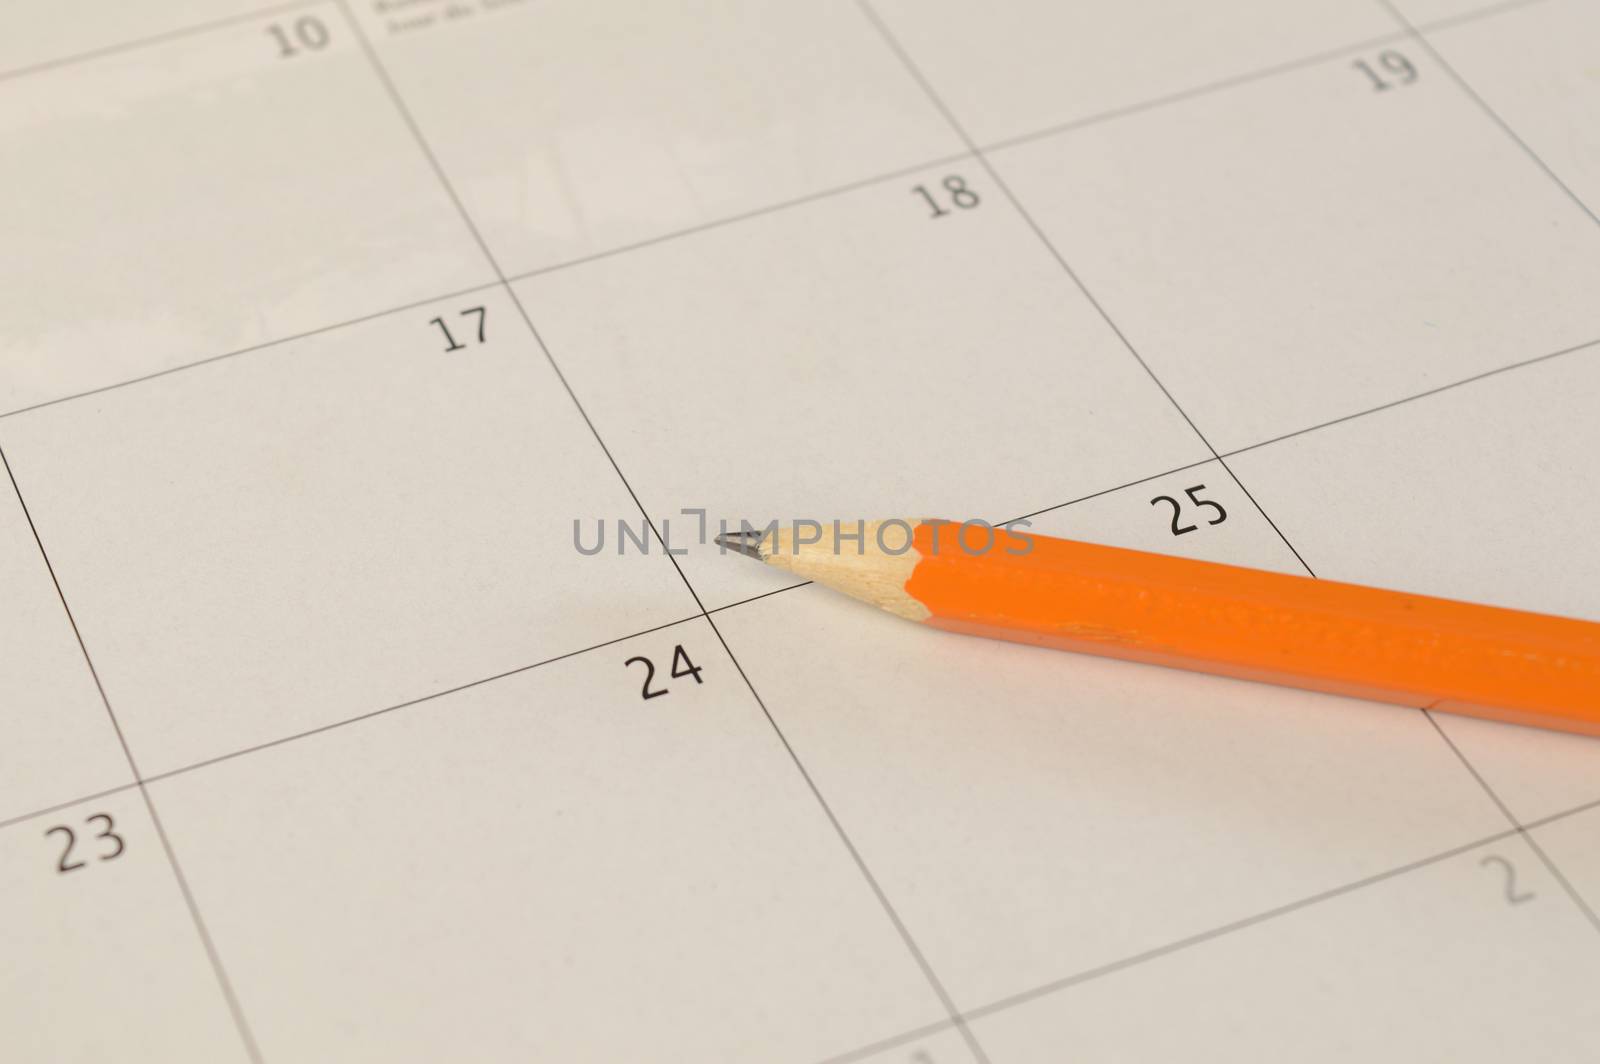 A closeup of a pencil and calendar to save important dates and memos.